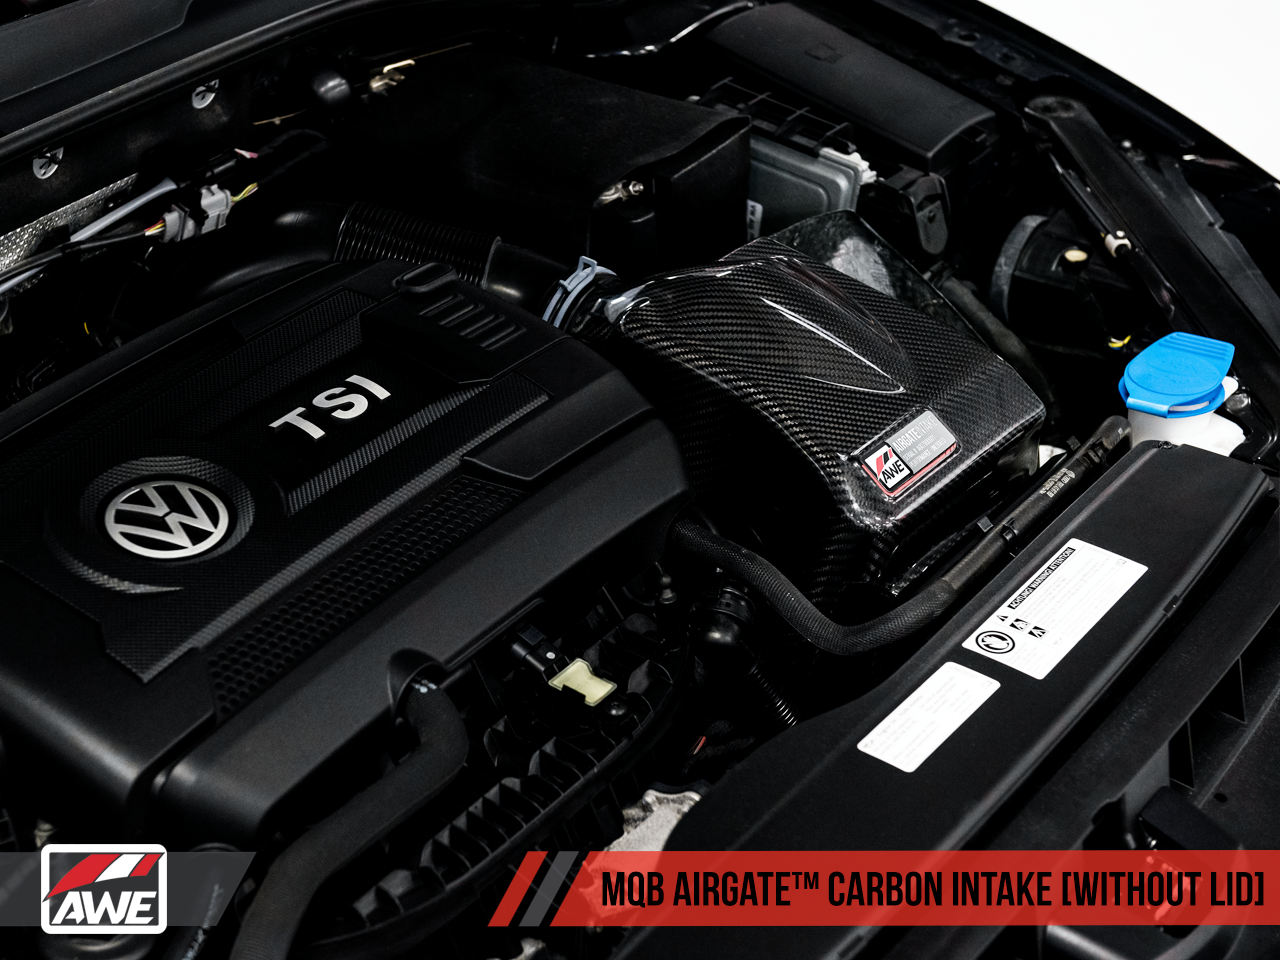 AWE AirGate™ Carbon Intake for Audi / VW MQB (1.8T / 2.0T) - Without Lid - 0